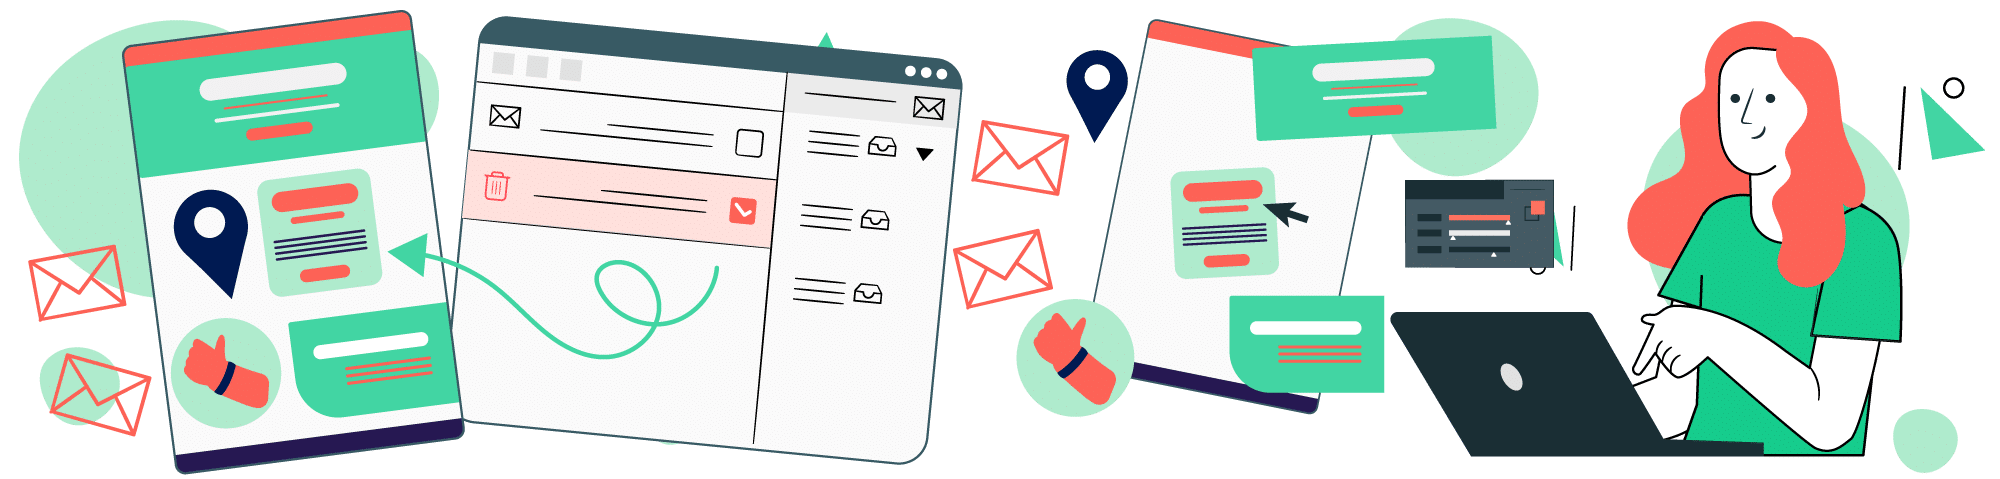 Improve Your Email Marketing With Graphic Design